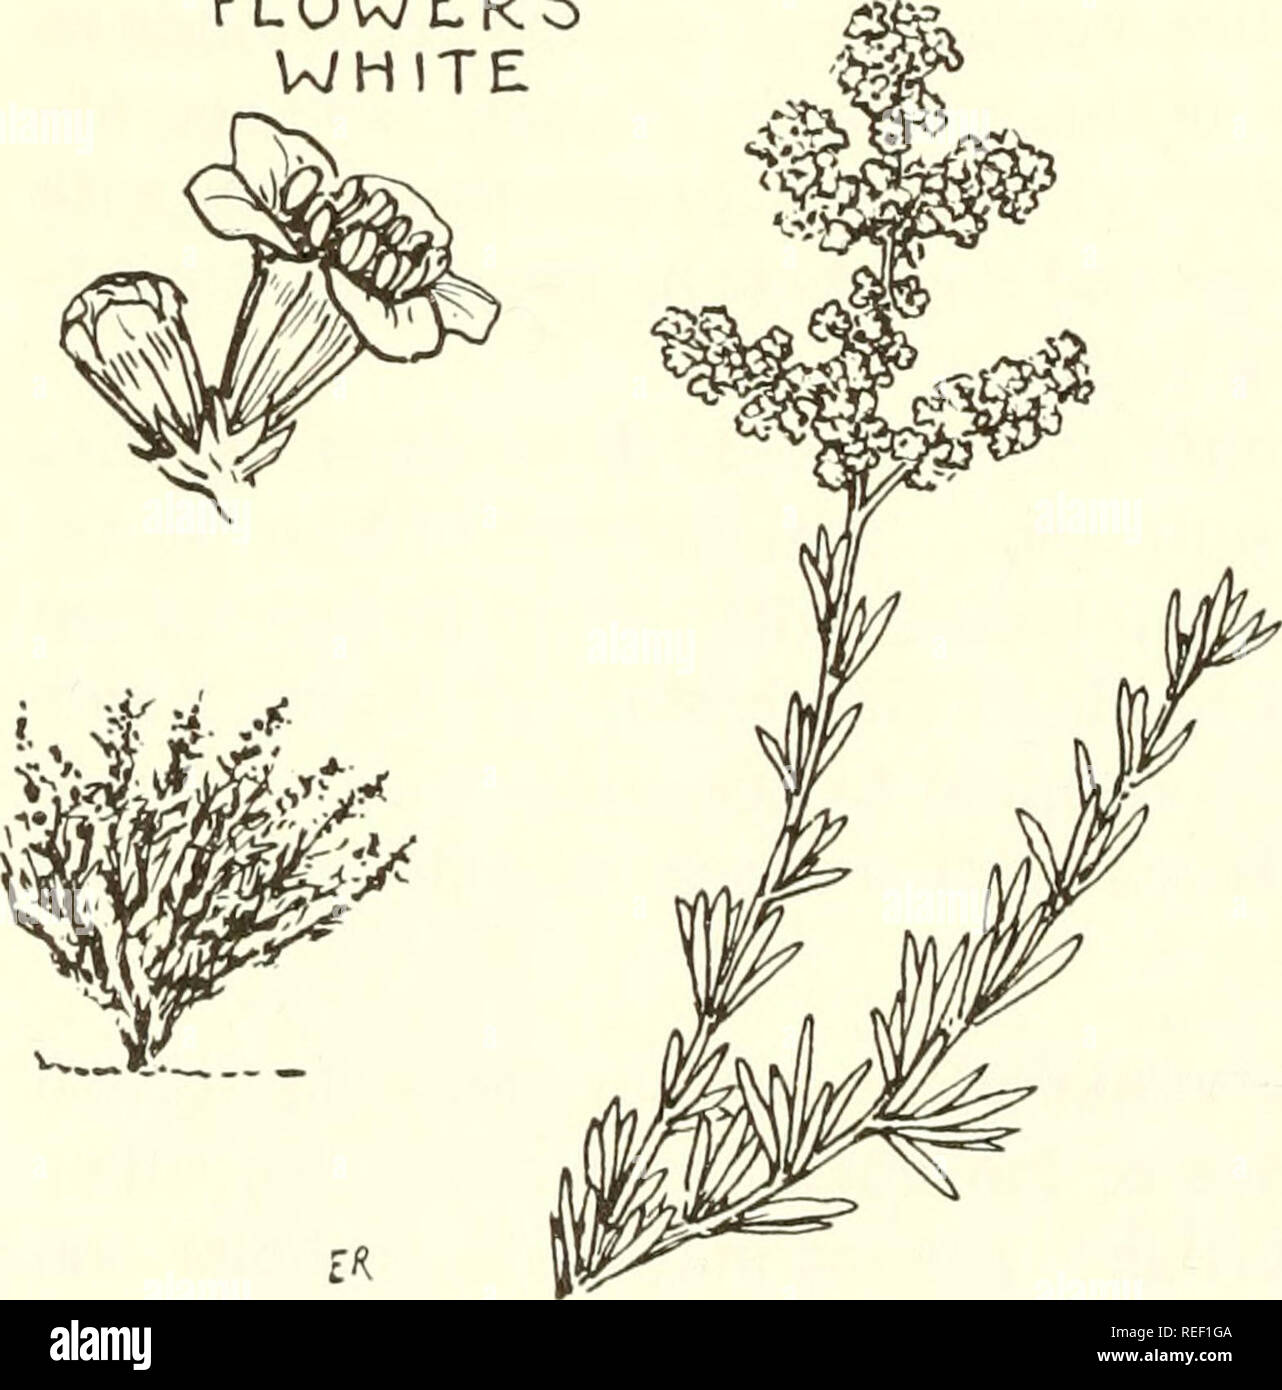 . Common edible and useful plants of the West. Plants, Edible -- West (U. S. ); Botany, Economic; Botany -- West (U. S. ). fL0WER5 WHITE S-6. CHAMISE, Adenos- toma fasciculatum; Rose Fam. A spreading shrub, 2'-10' high, with slender, wand - like branches and graceful, pyramidal clus- ters of white flowers in June; fruits gray^ new bark is reddish, turning gray when old. It is quick to catch fire due to resin in leaves. If burned, the first year's leaves are grazed by stock and deer. Bees frequent the blossoms for pollen; gold- finches and woodrats eat the seeds. Indians used an infusion of bar Stock Photo